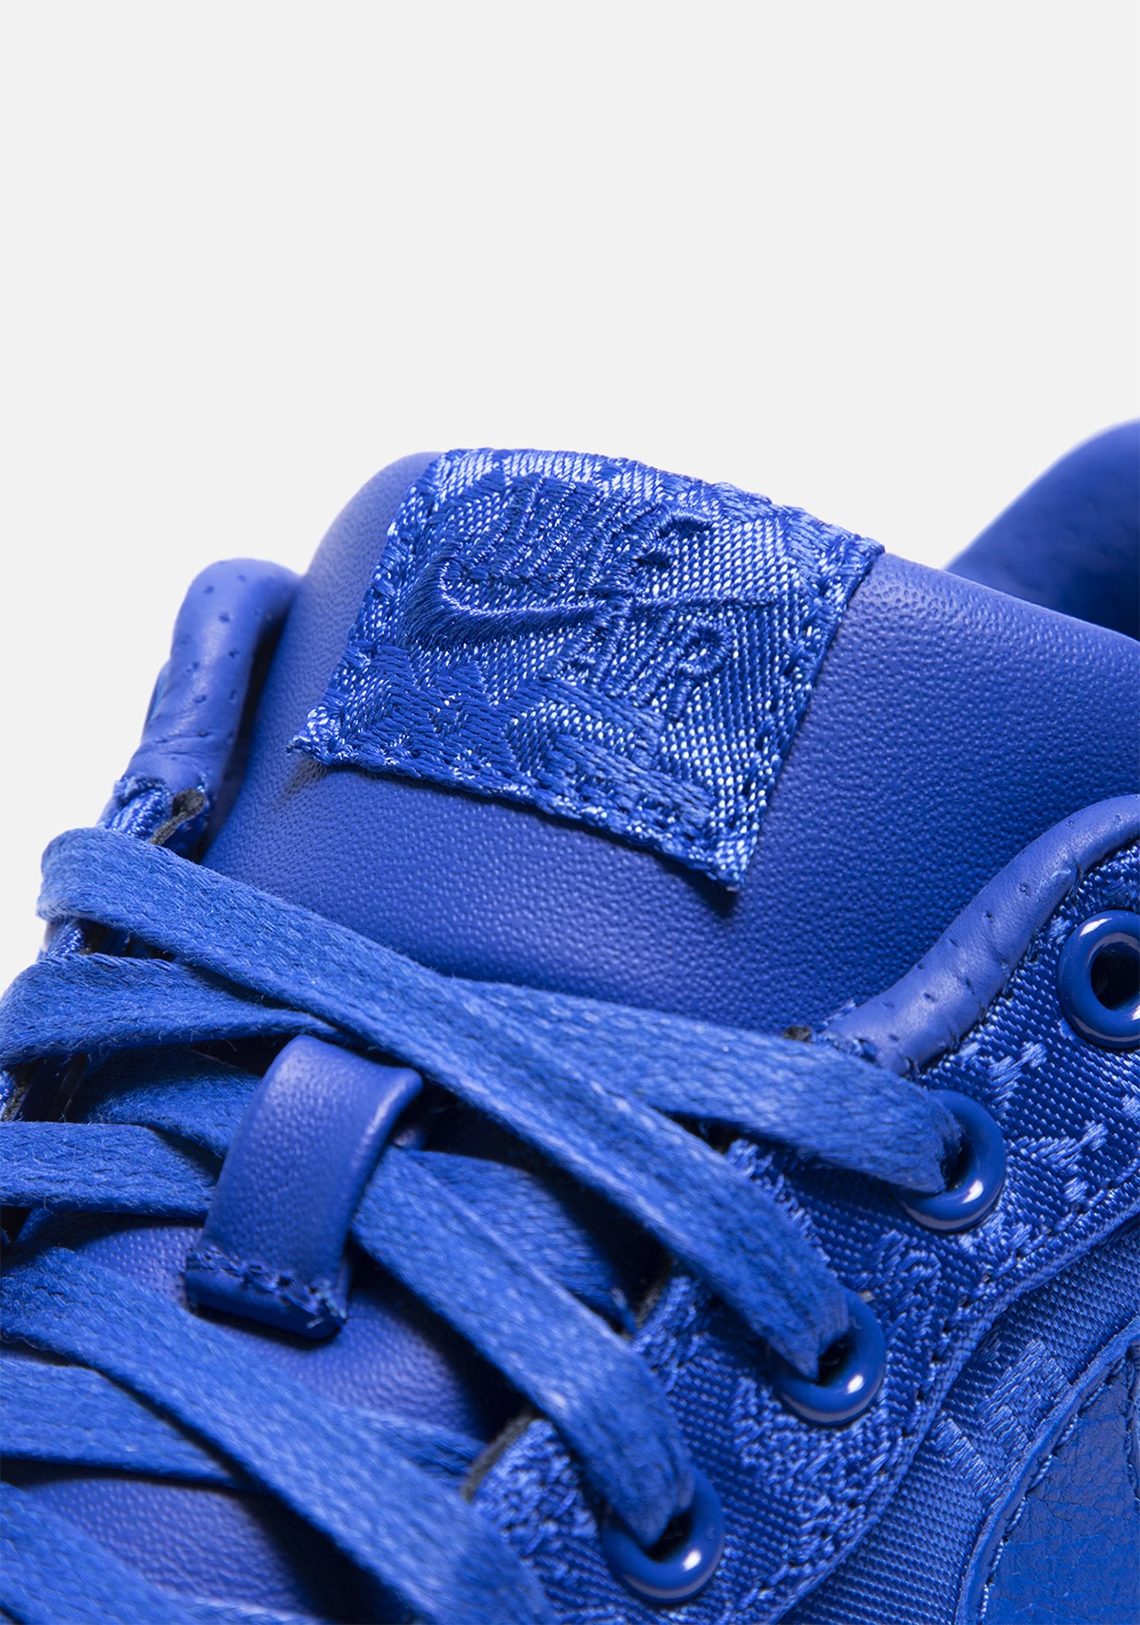 Clot Nike fragment design x nike sb koston one holiday 2013 collection Royal Blue Release Date 3